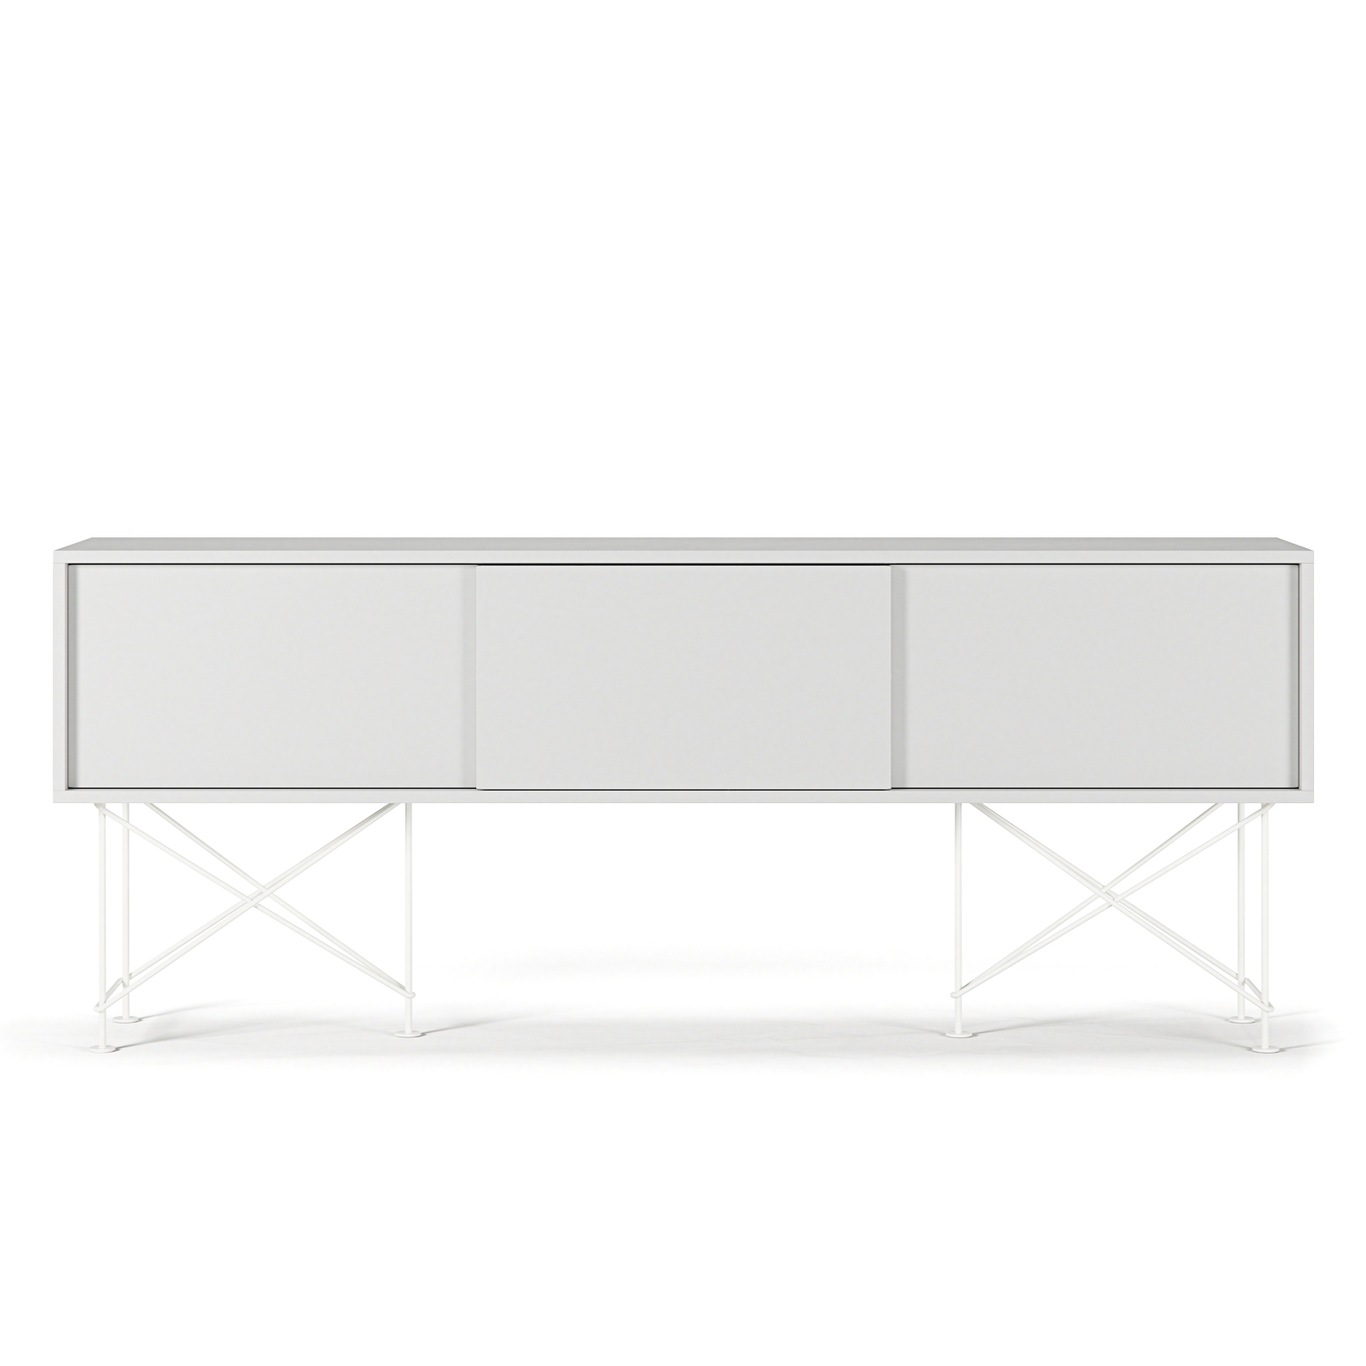 Vogue Media Bench With Stand 180 cm, White / White